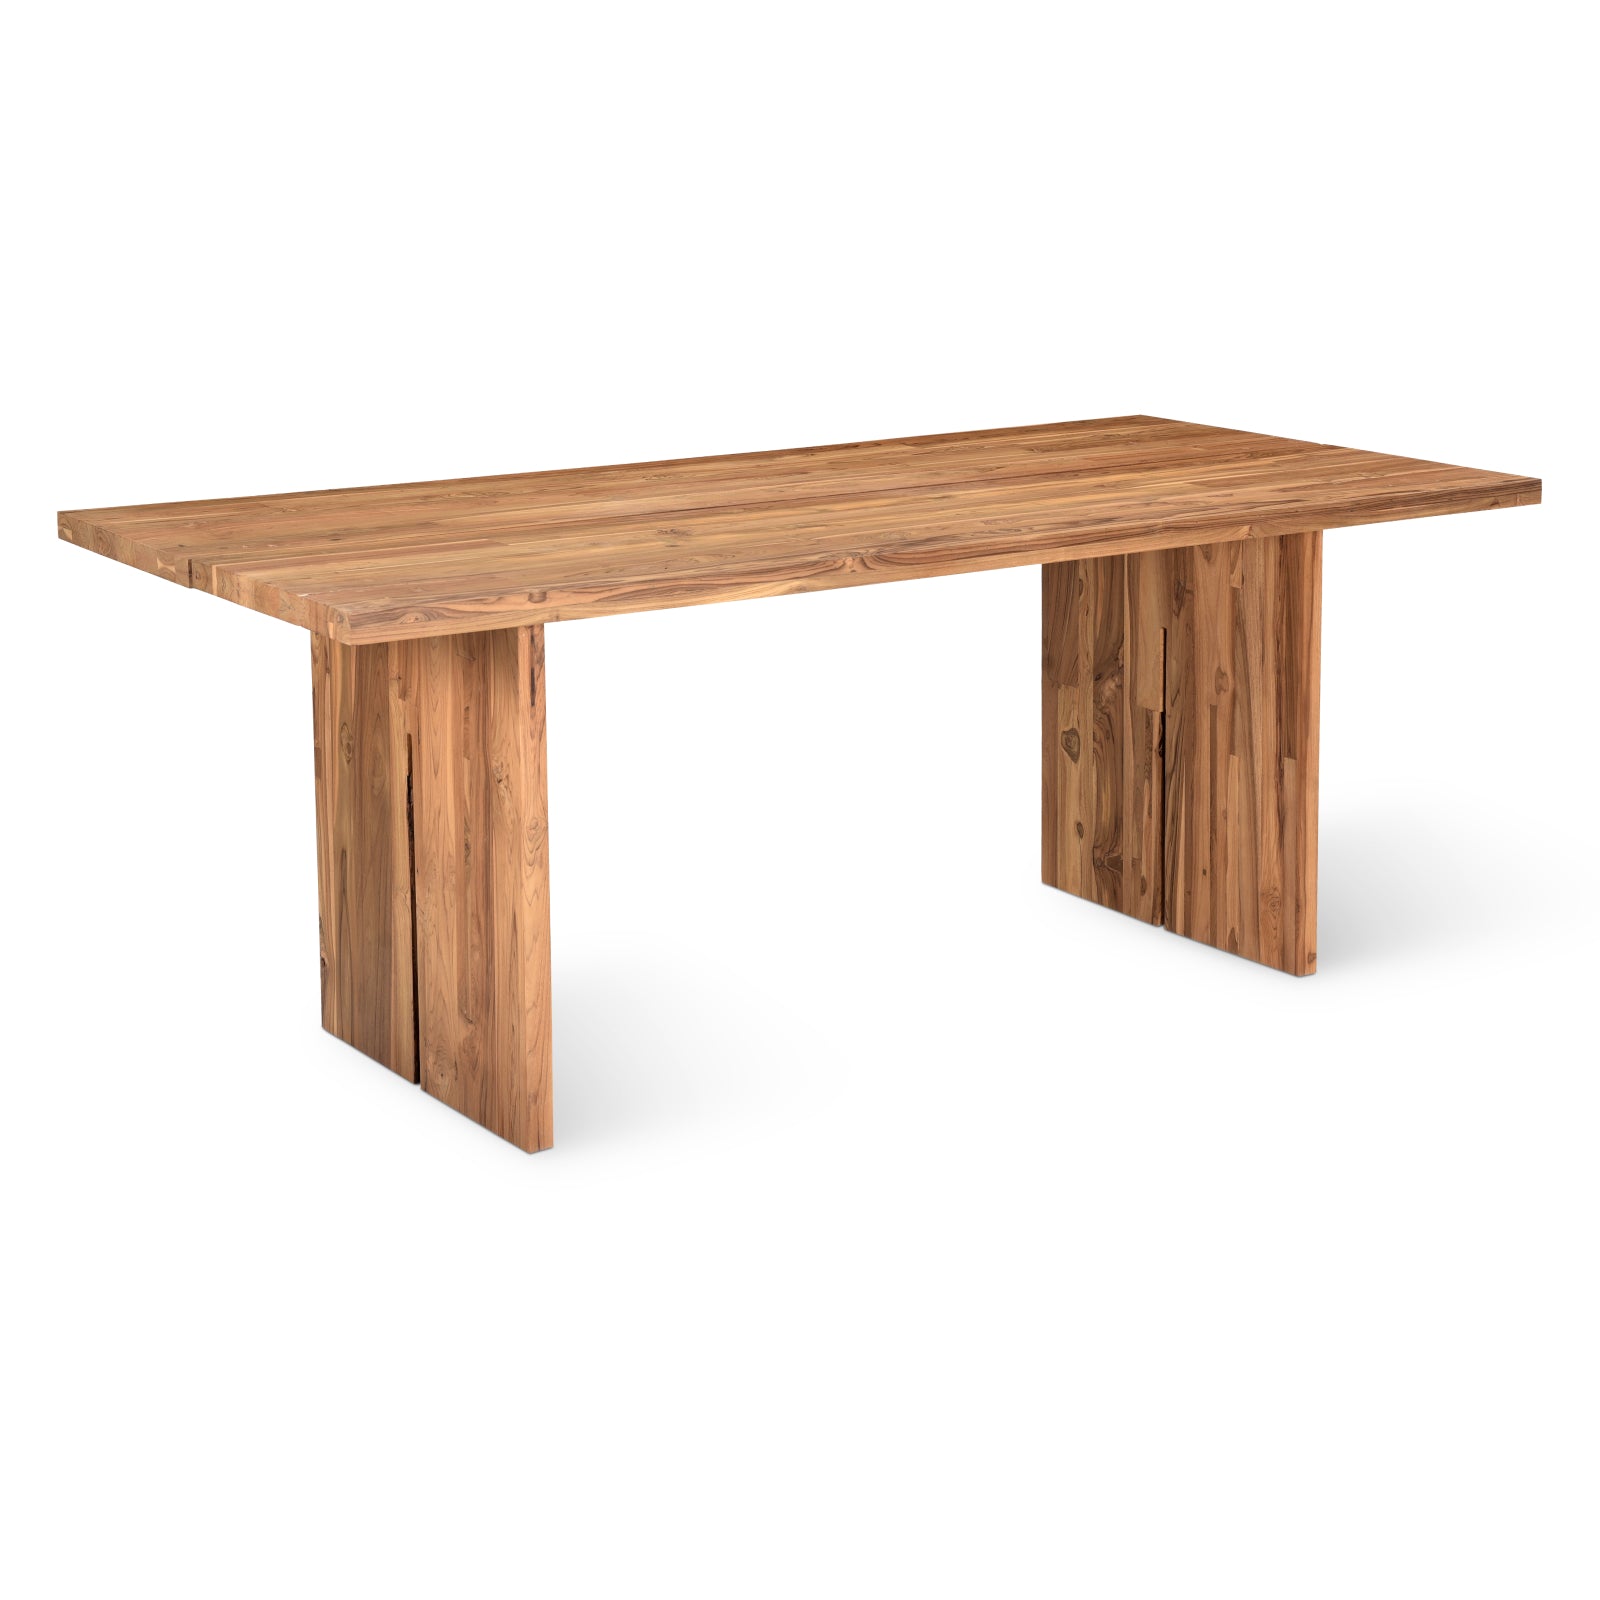 Plane Outdoor Dining Table, Seats 8-10, Teak - Image 8